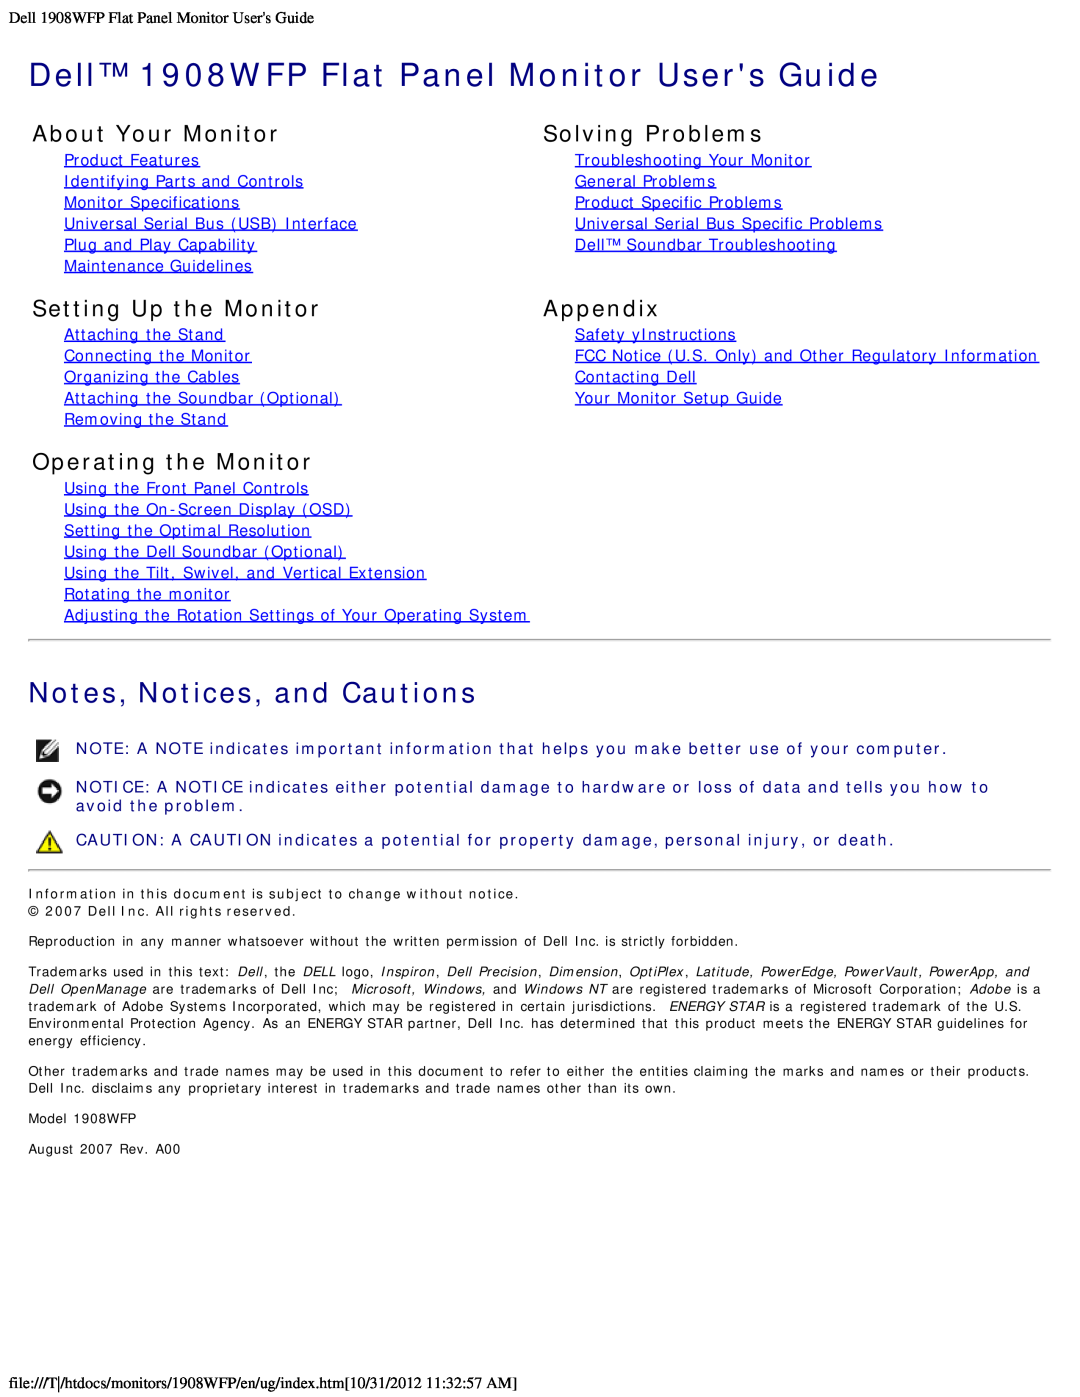 Dell manual Notes, Notices, and Cautions, Dell 1908WFP Flat Panel Monitor Users Guide, About Your Monitor, Appendix 